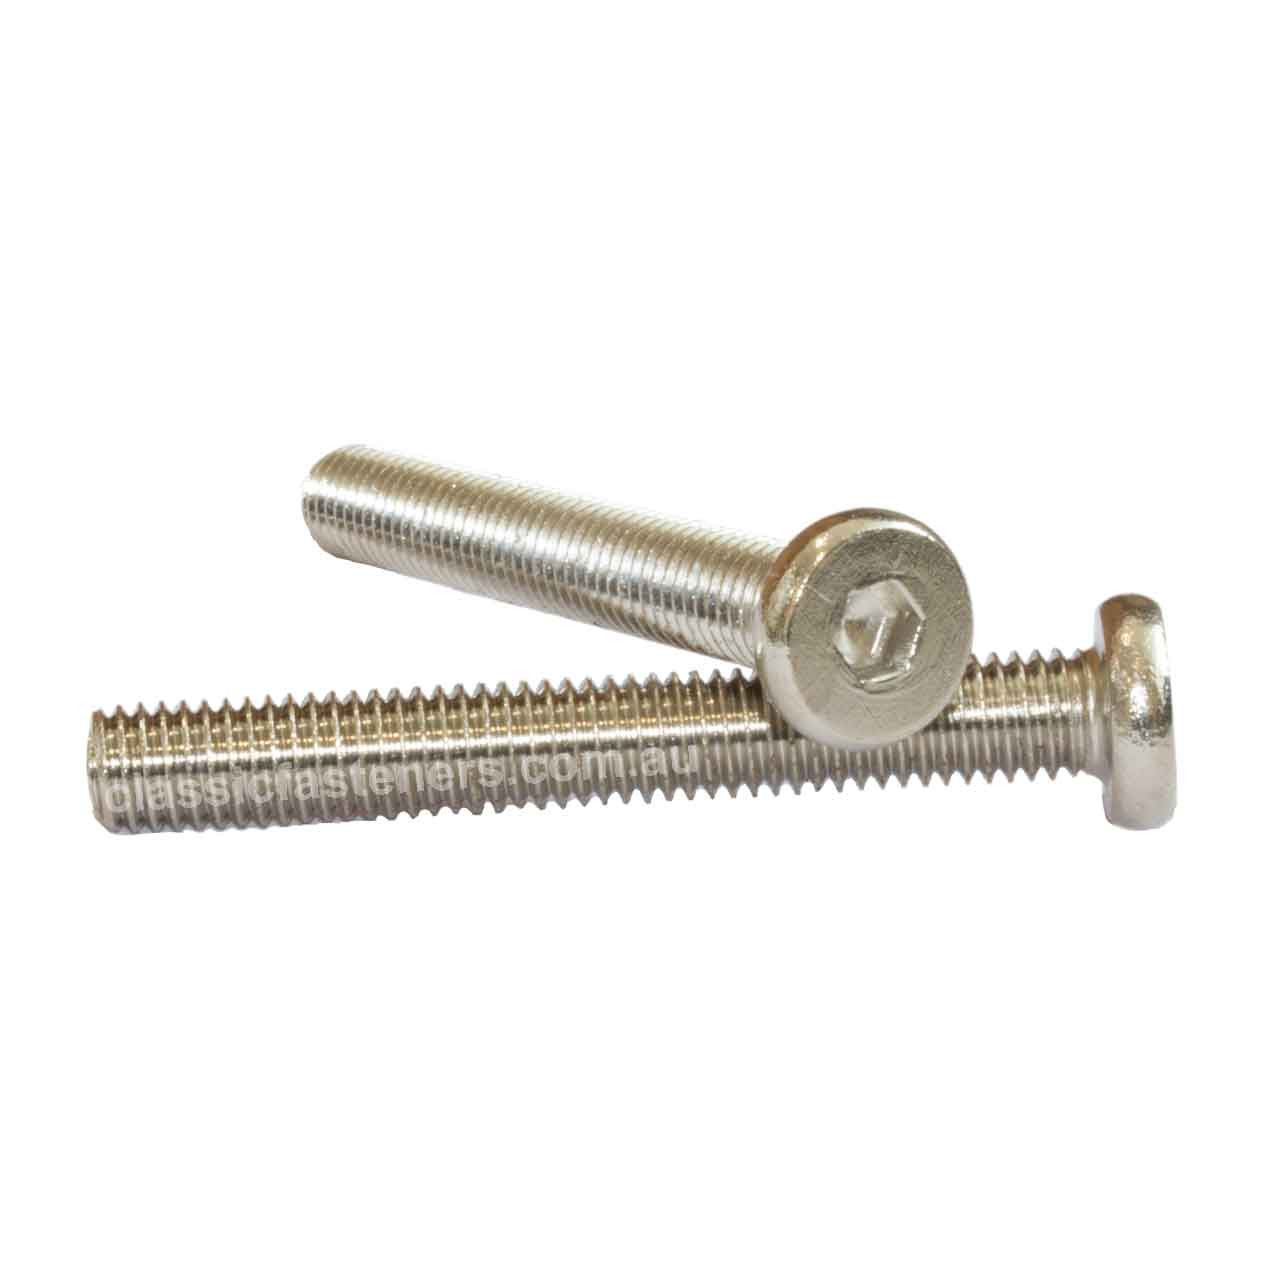 M6 x 45mm Furniture Connector Bolt Nickel Plated